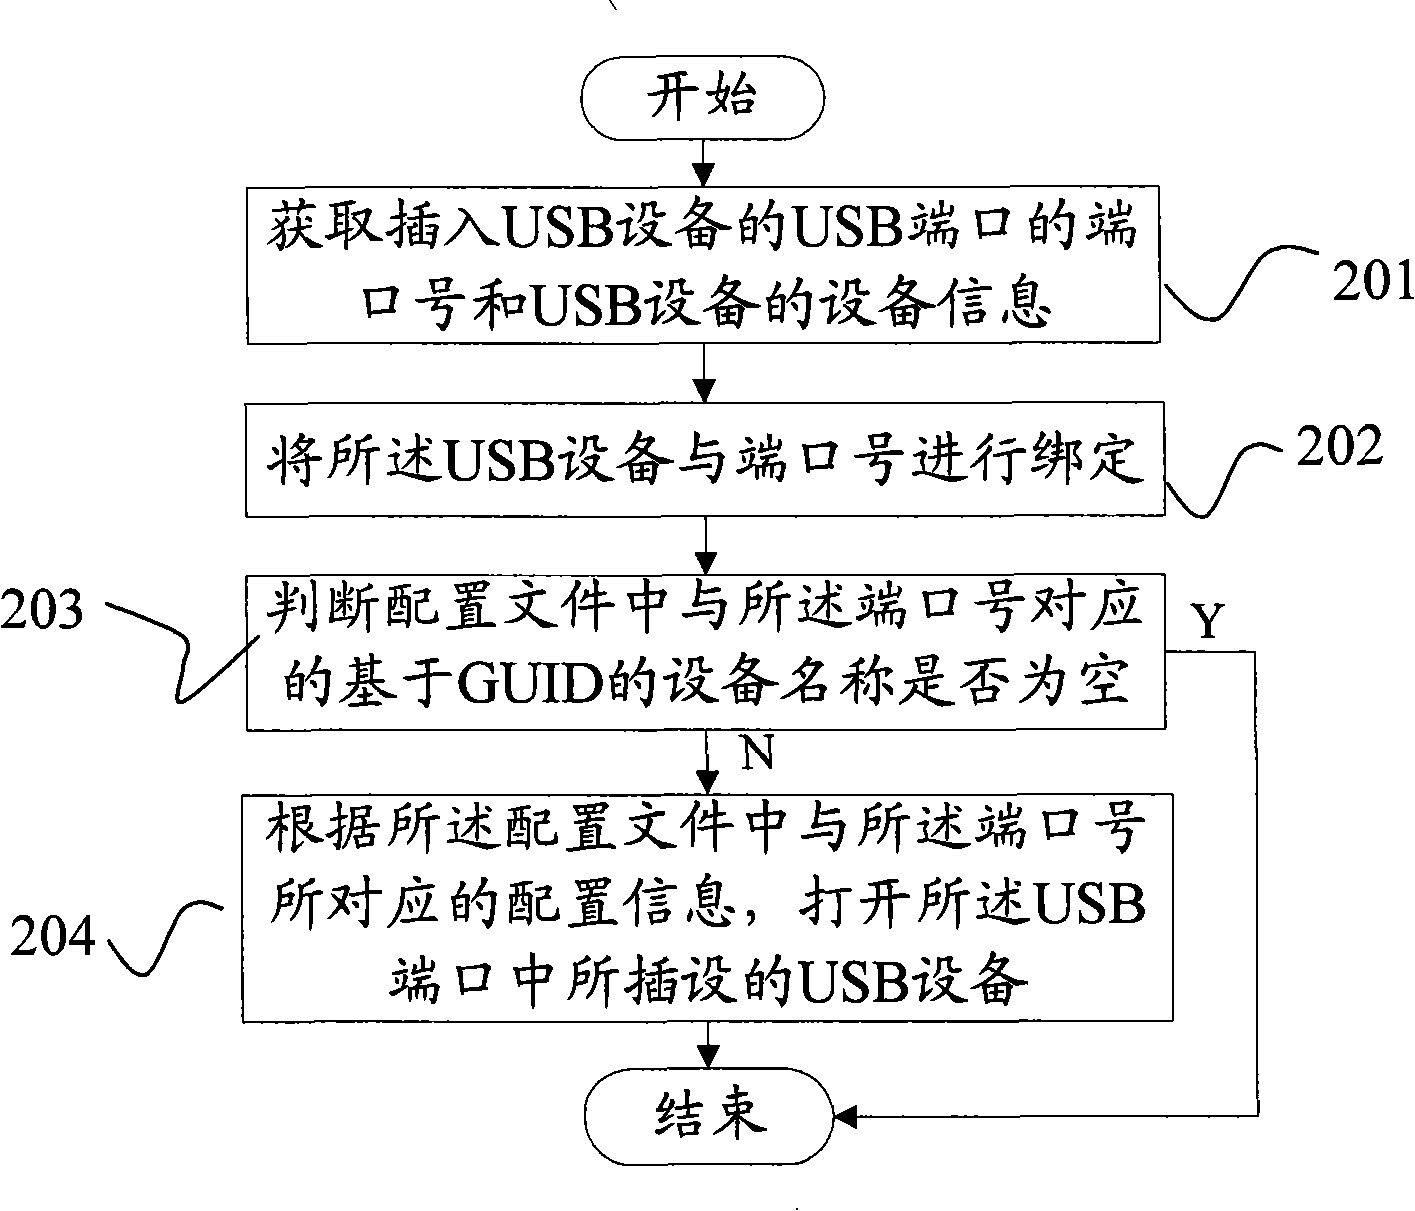 Method and apparatus for opening appoint terminal port USB equipment